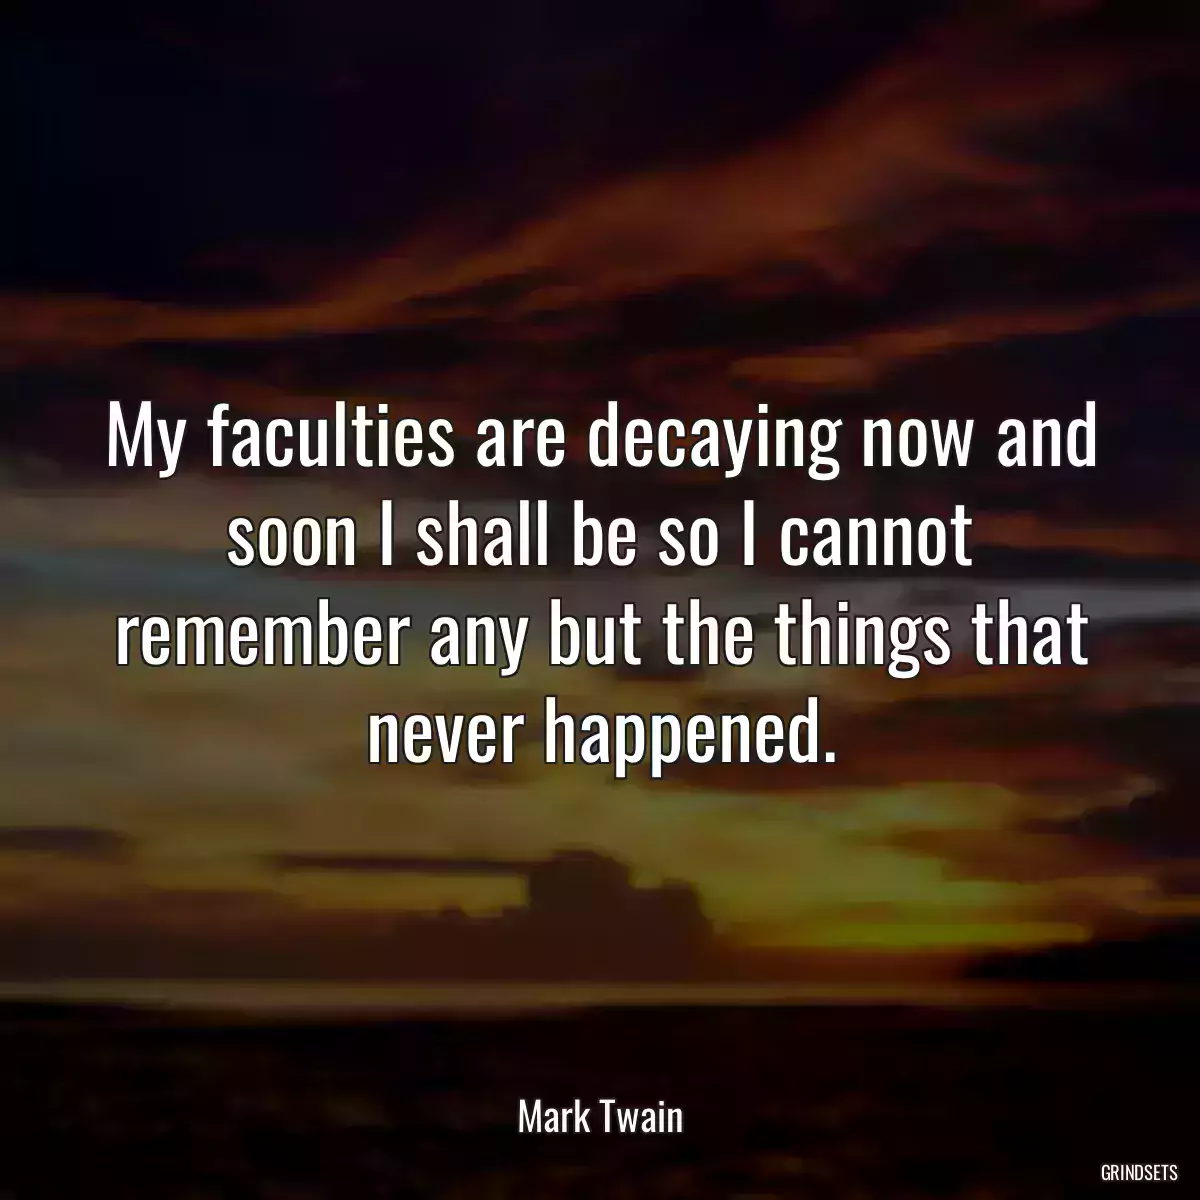 My faculties are decaying now and soon I shall be so I cannot remember any but the things that never happened.